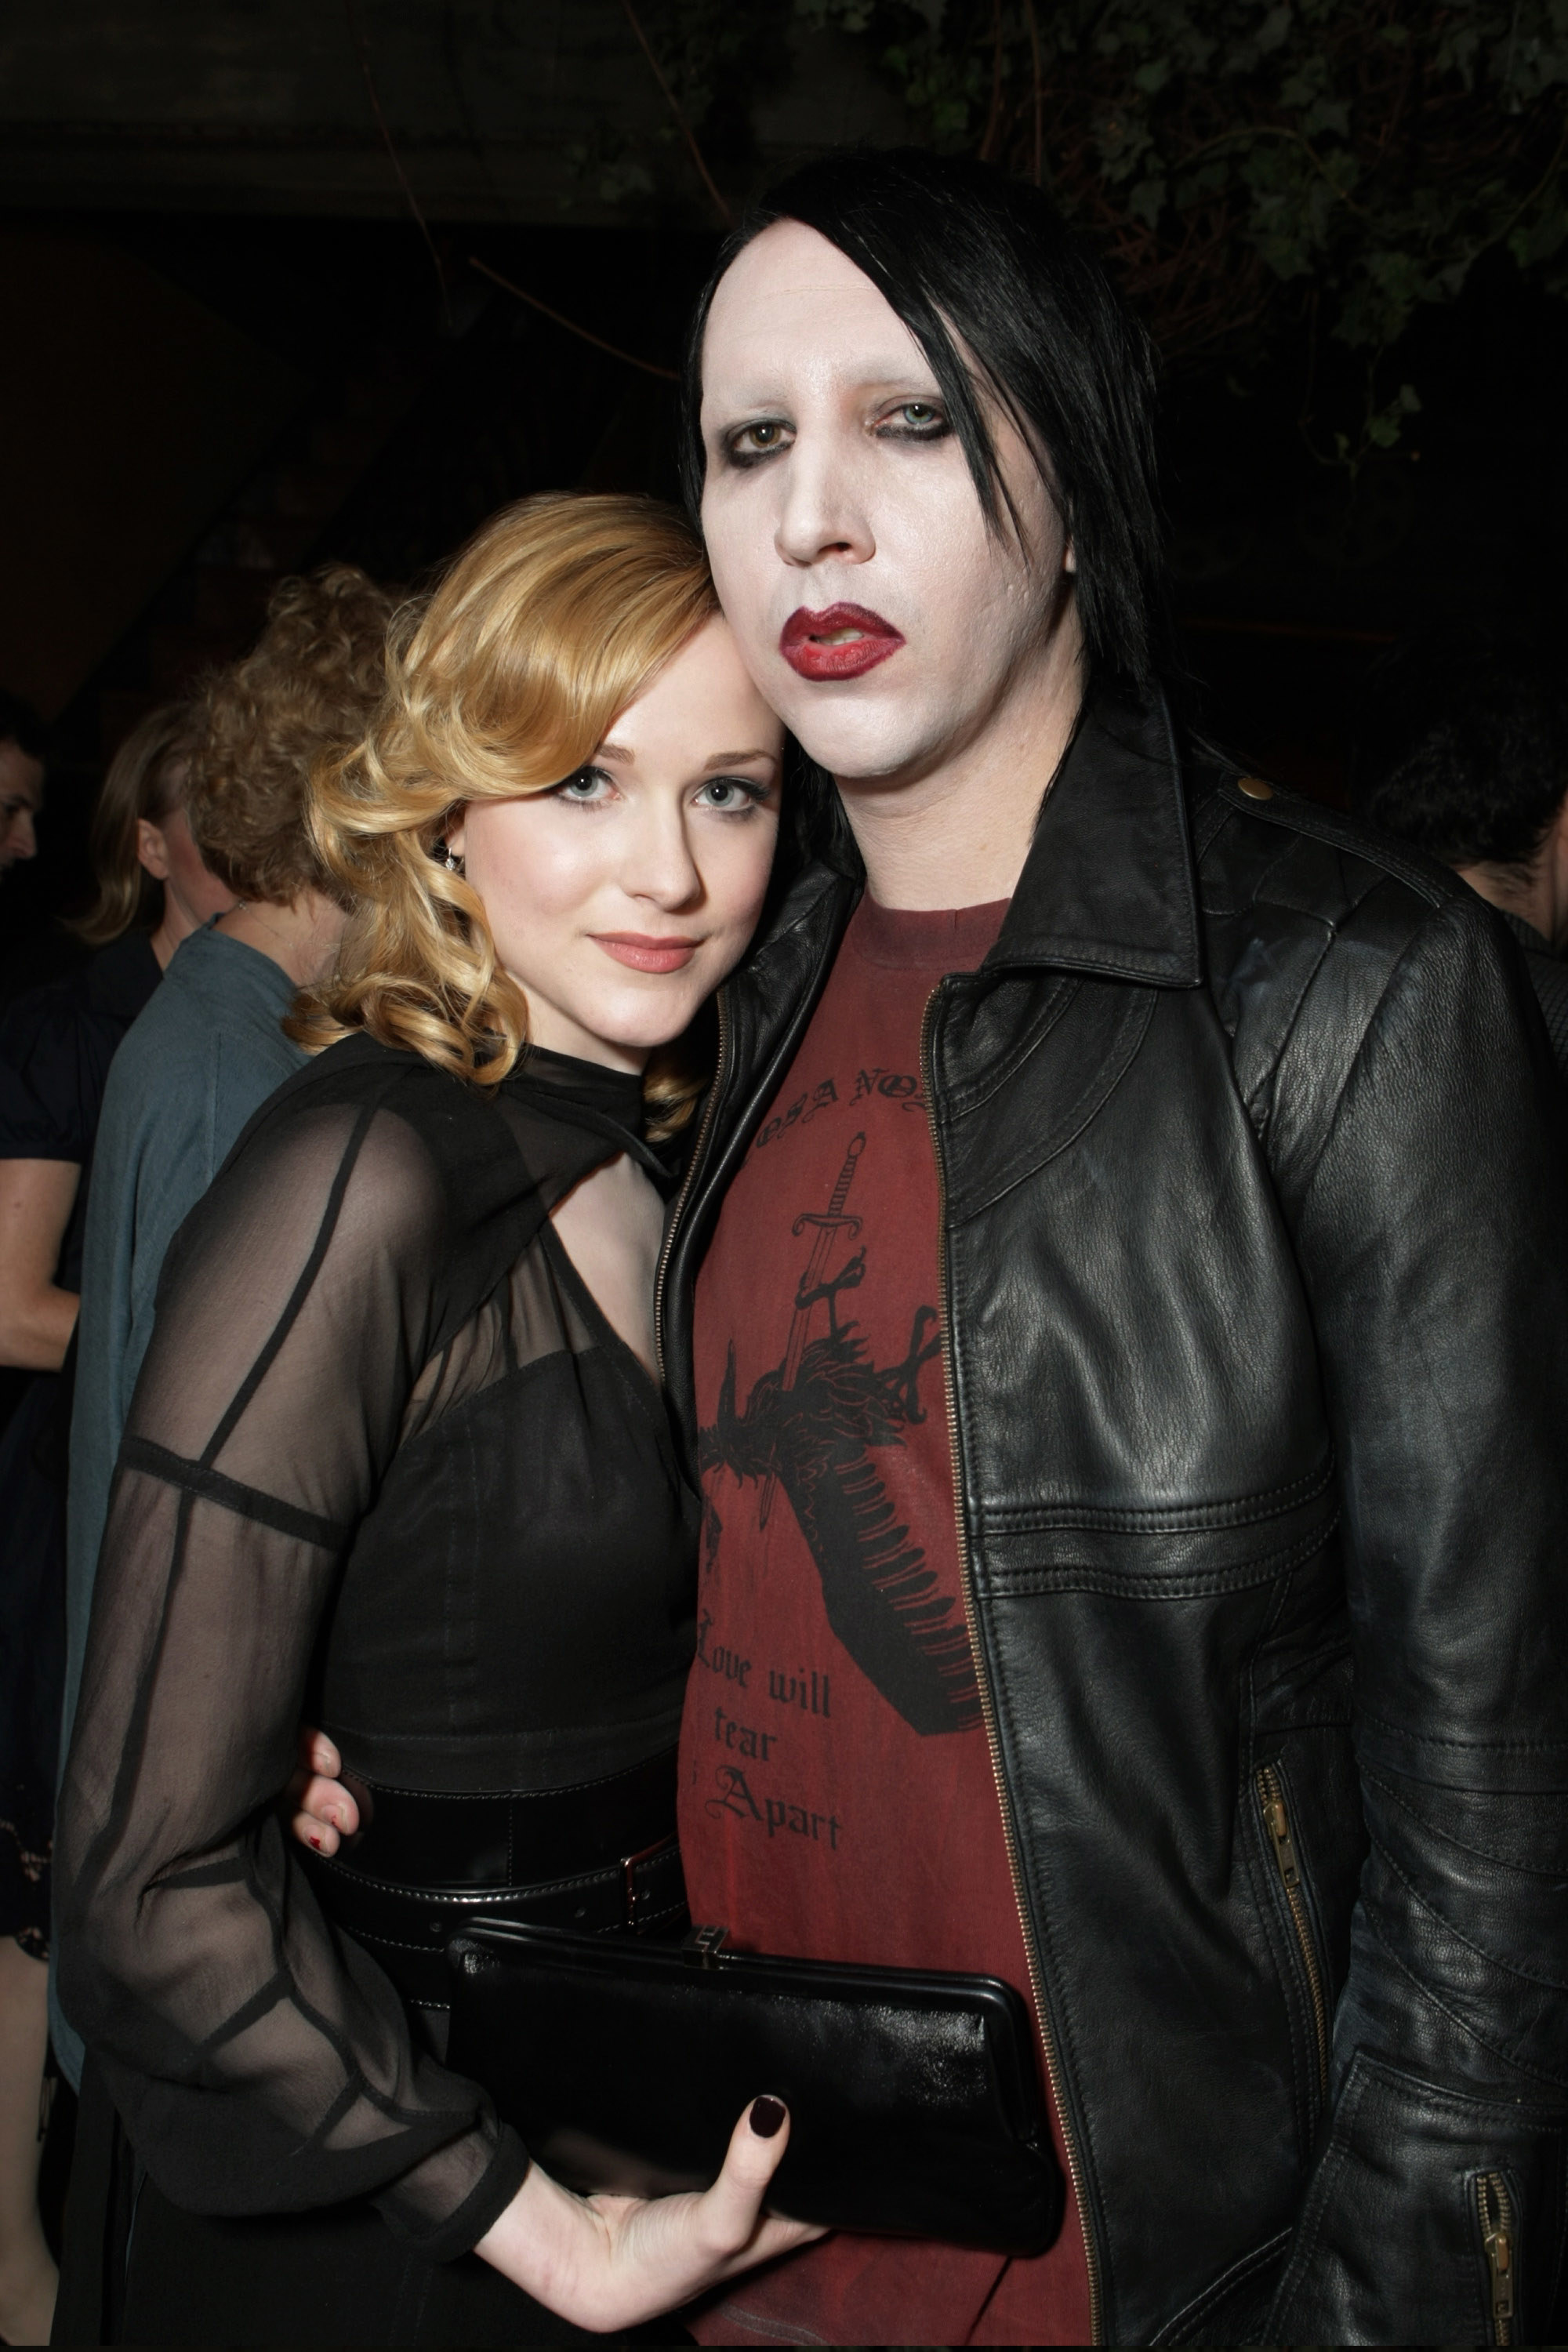 Evan Rachel Wood stands next to Marilyn Manson at the Toronto International Film Festival in 2007